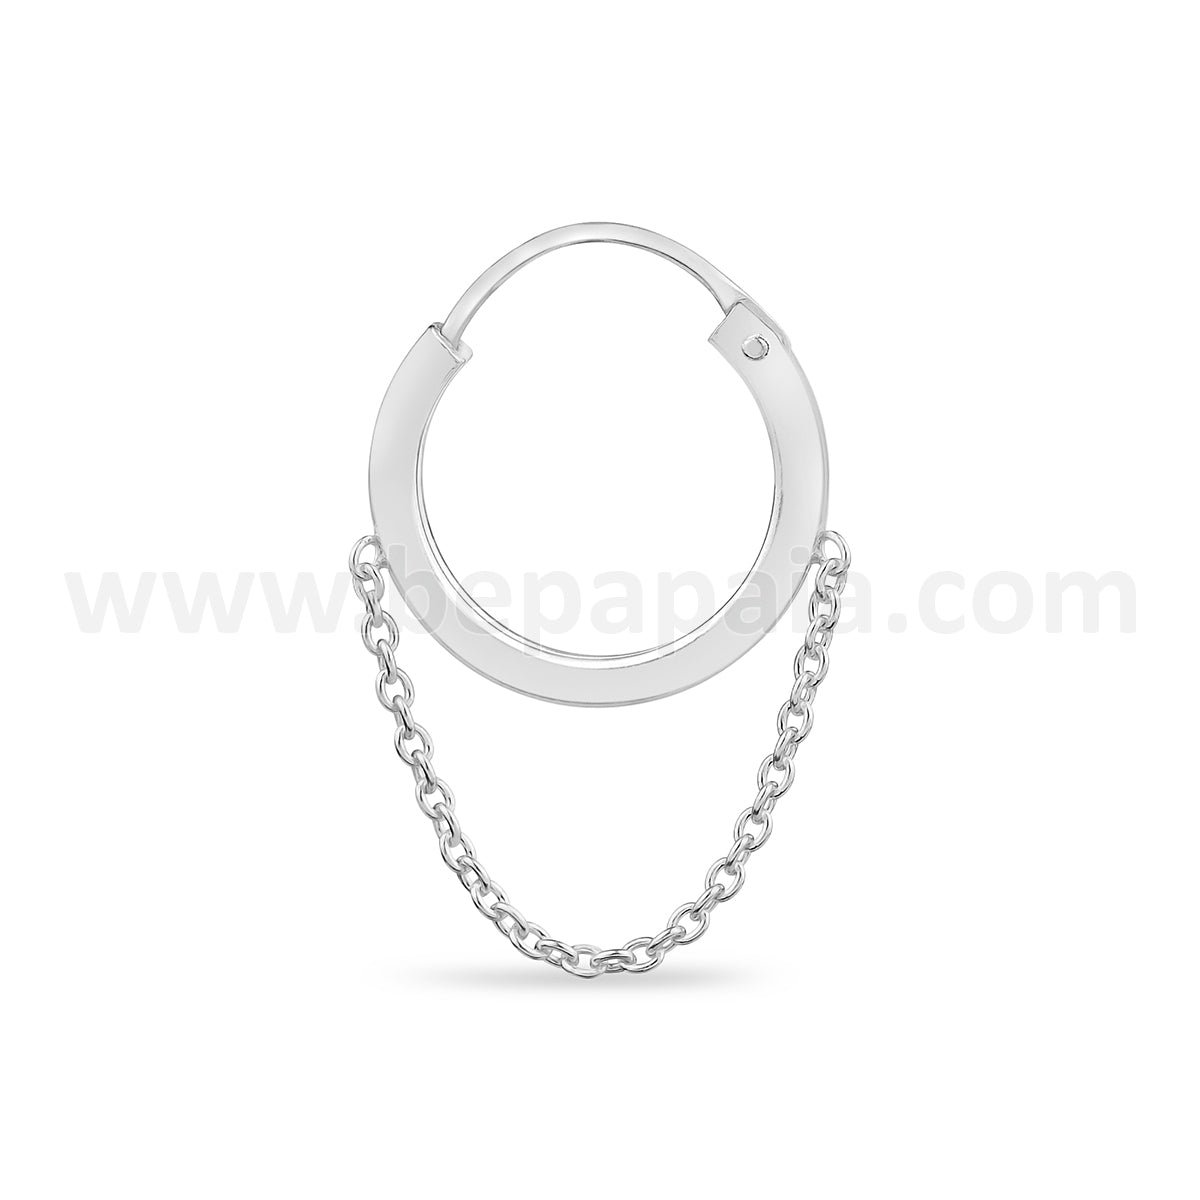 Silver hoop earring with a little chain